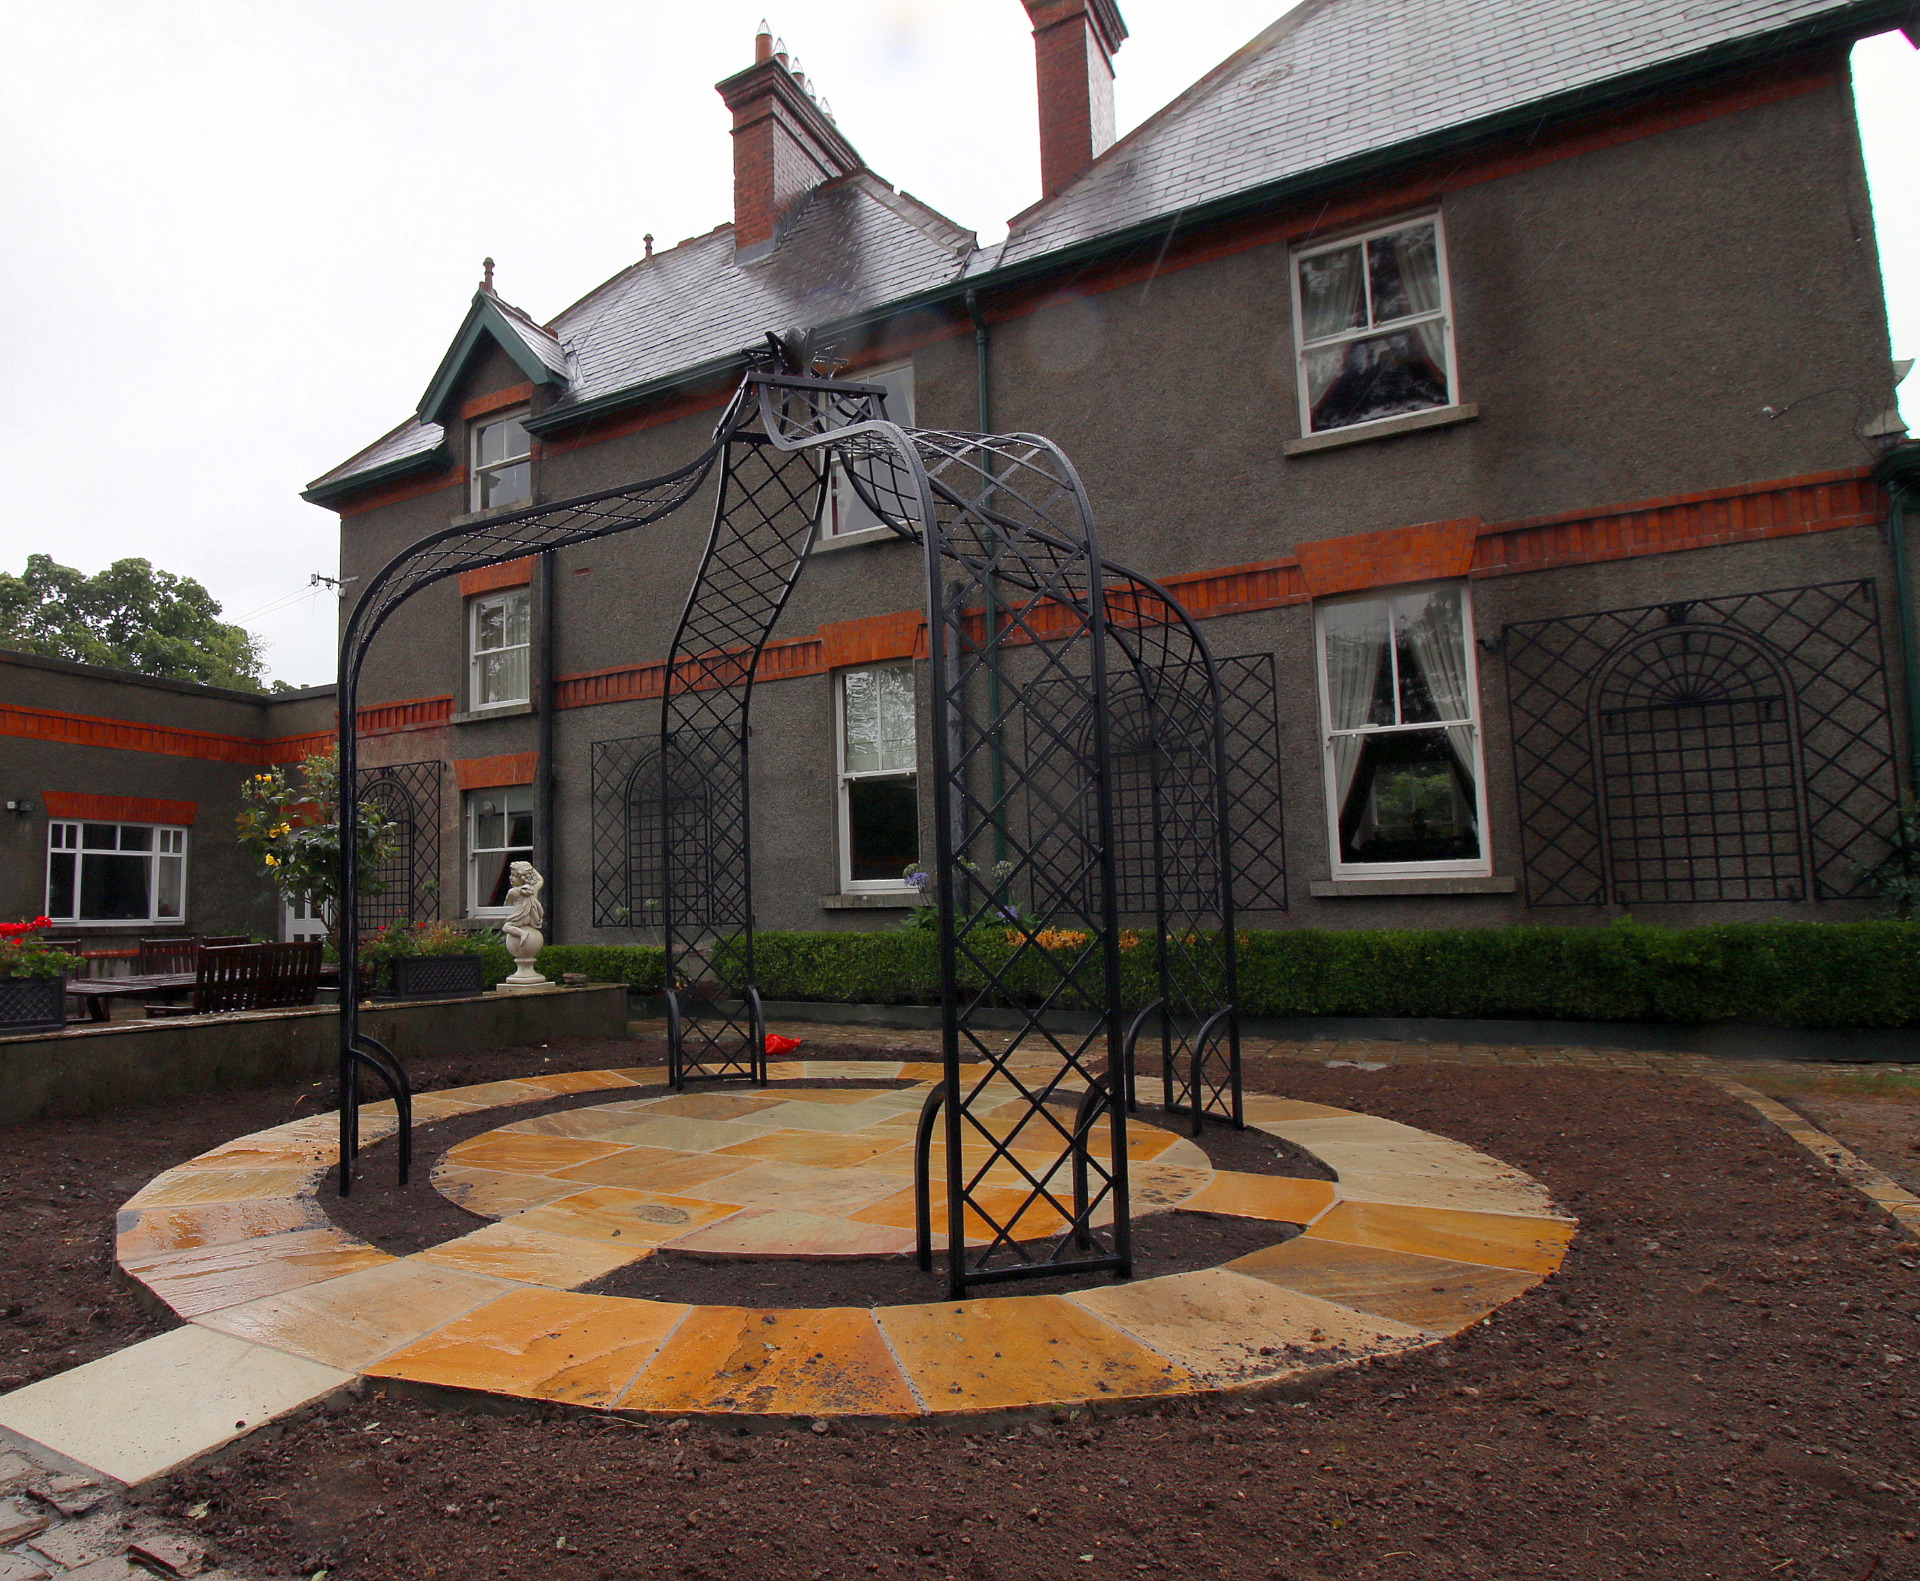 The Victorian Kiftsgate Rose Pavilion, supplied + installed by Owen Chubb Garden Landscapers. Tel 087-2306128